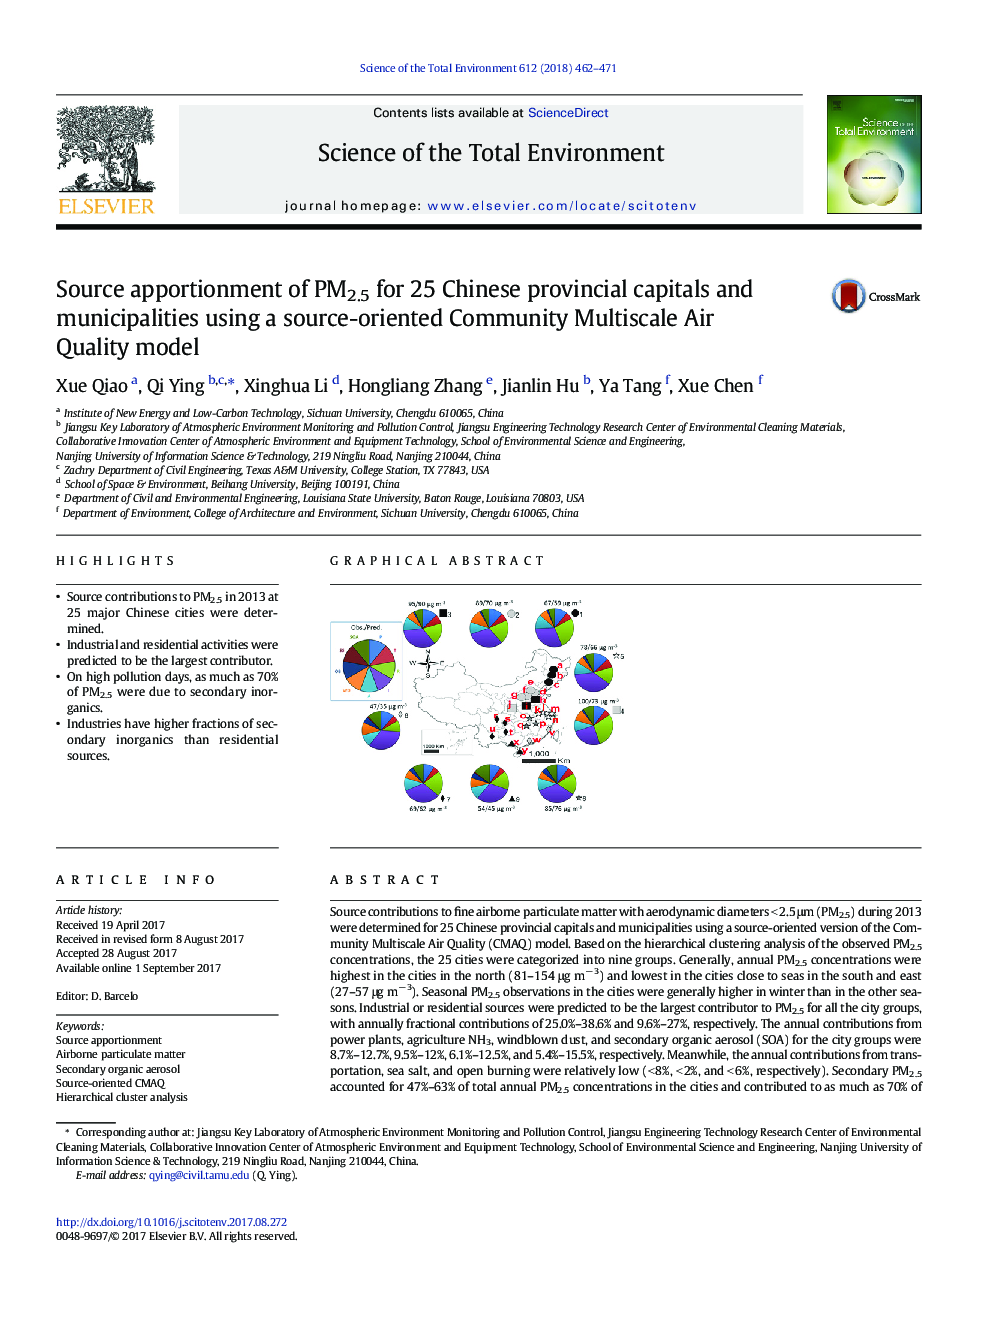 Source apportionment of PM2.5 for 25 Chinese provincial capitals and municipalities using a source-oriented Community Multiscale Air Quality model